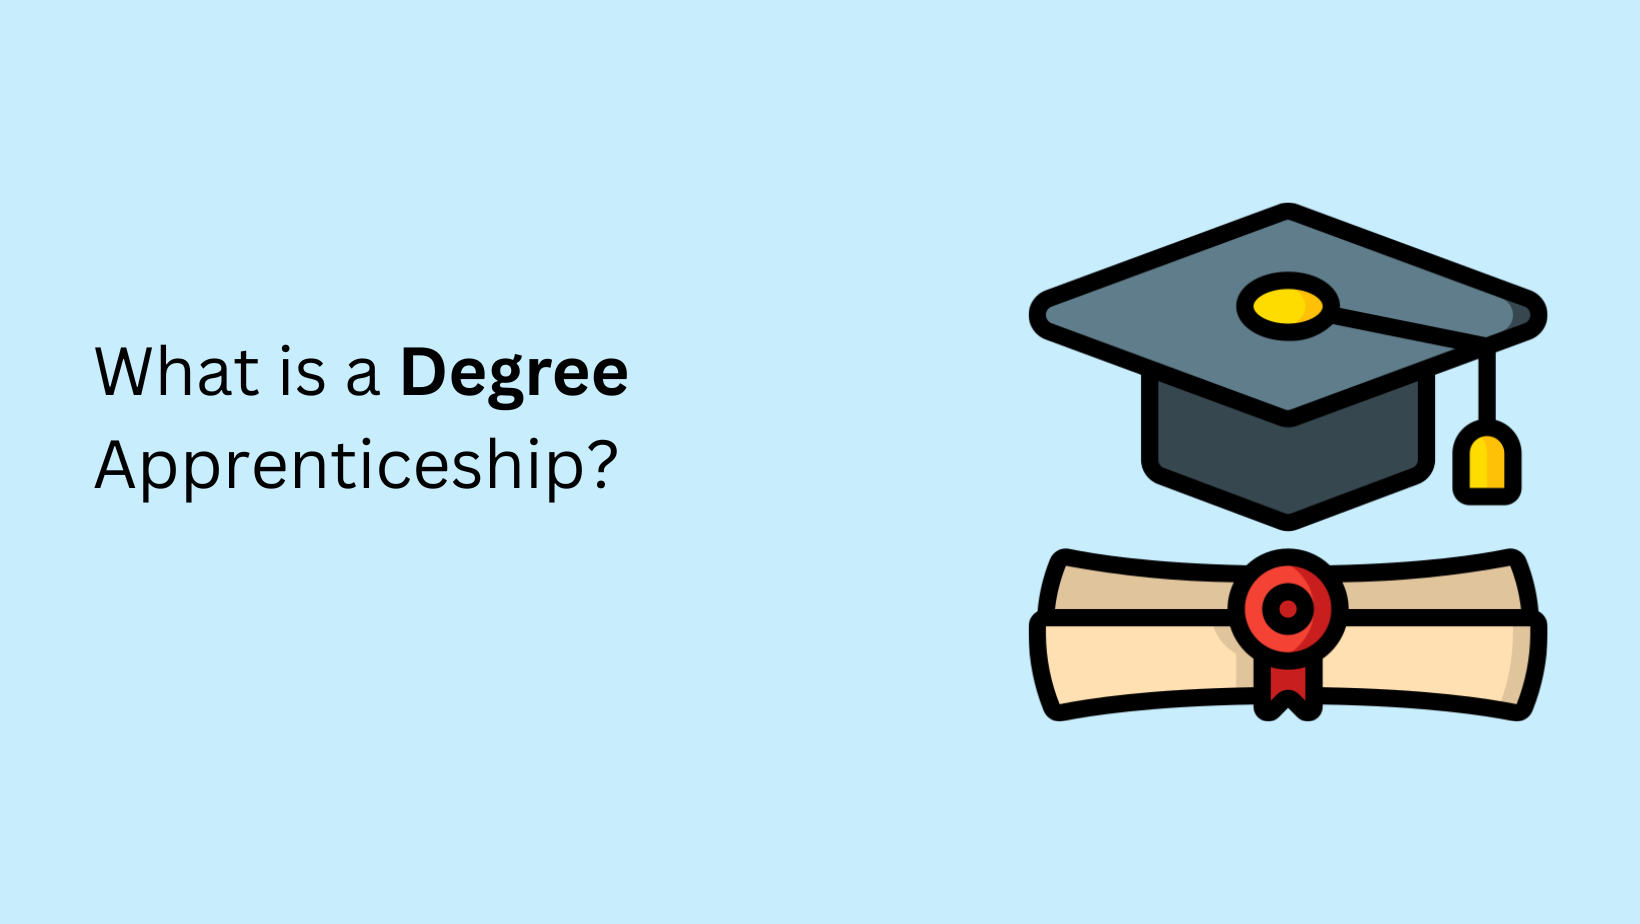 What is a Degree Apprenticeship